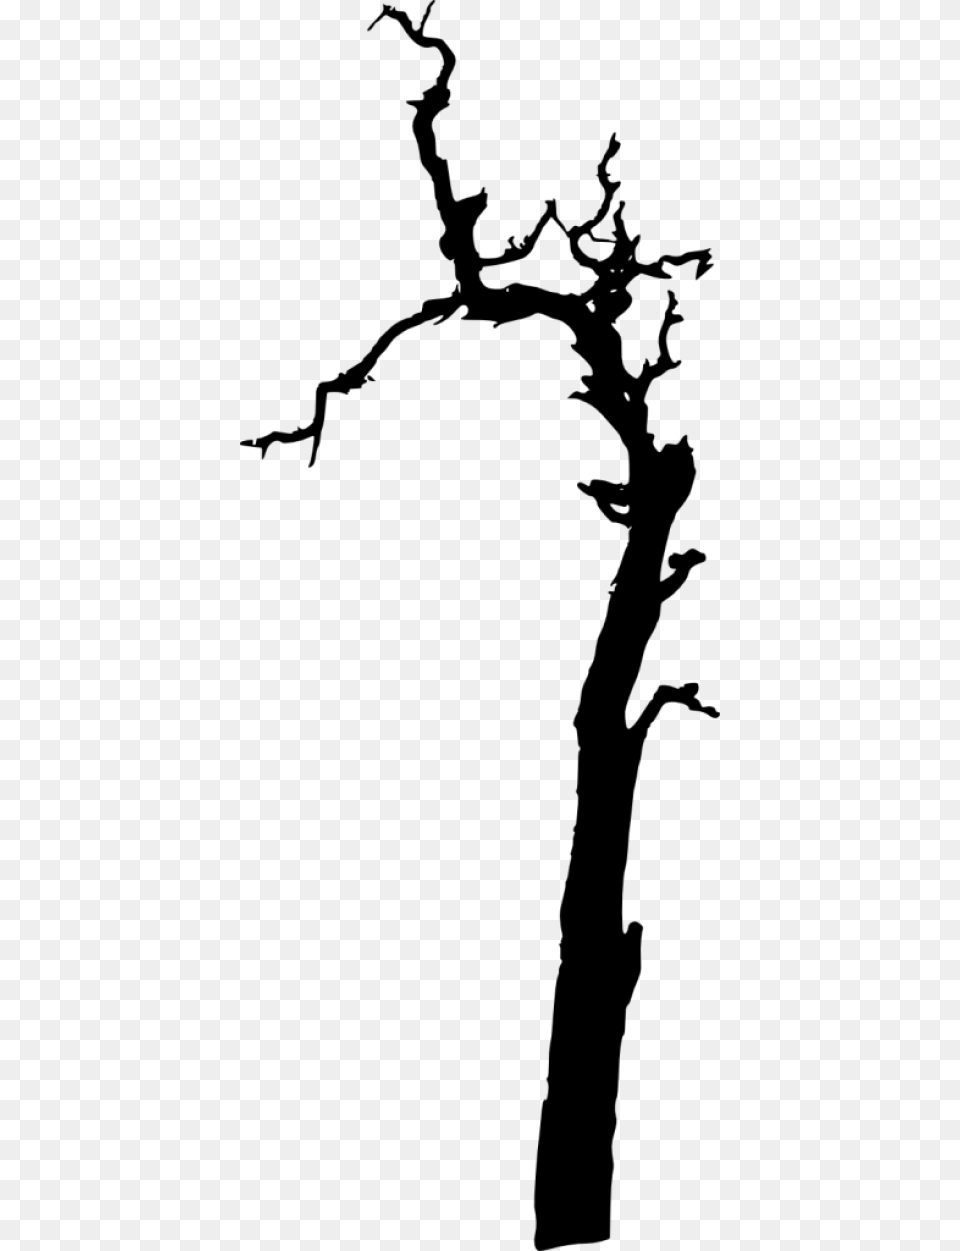 Dead Tree Silhouette Images Transparent Silhouette, Plant, Tree Trunk, Wood Free Png Download